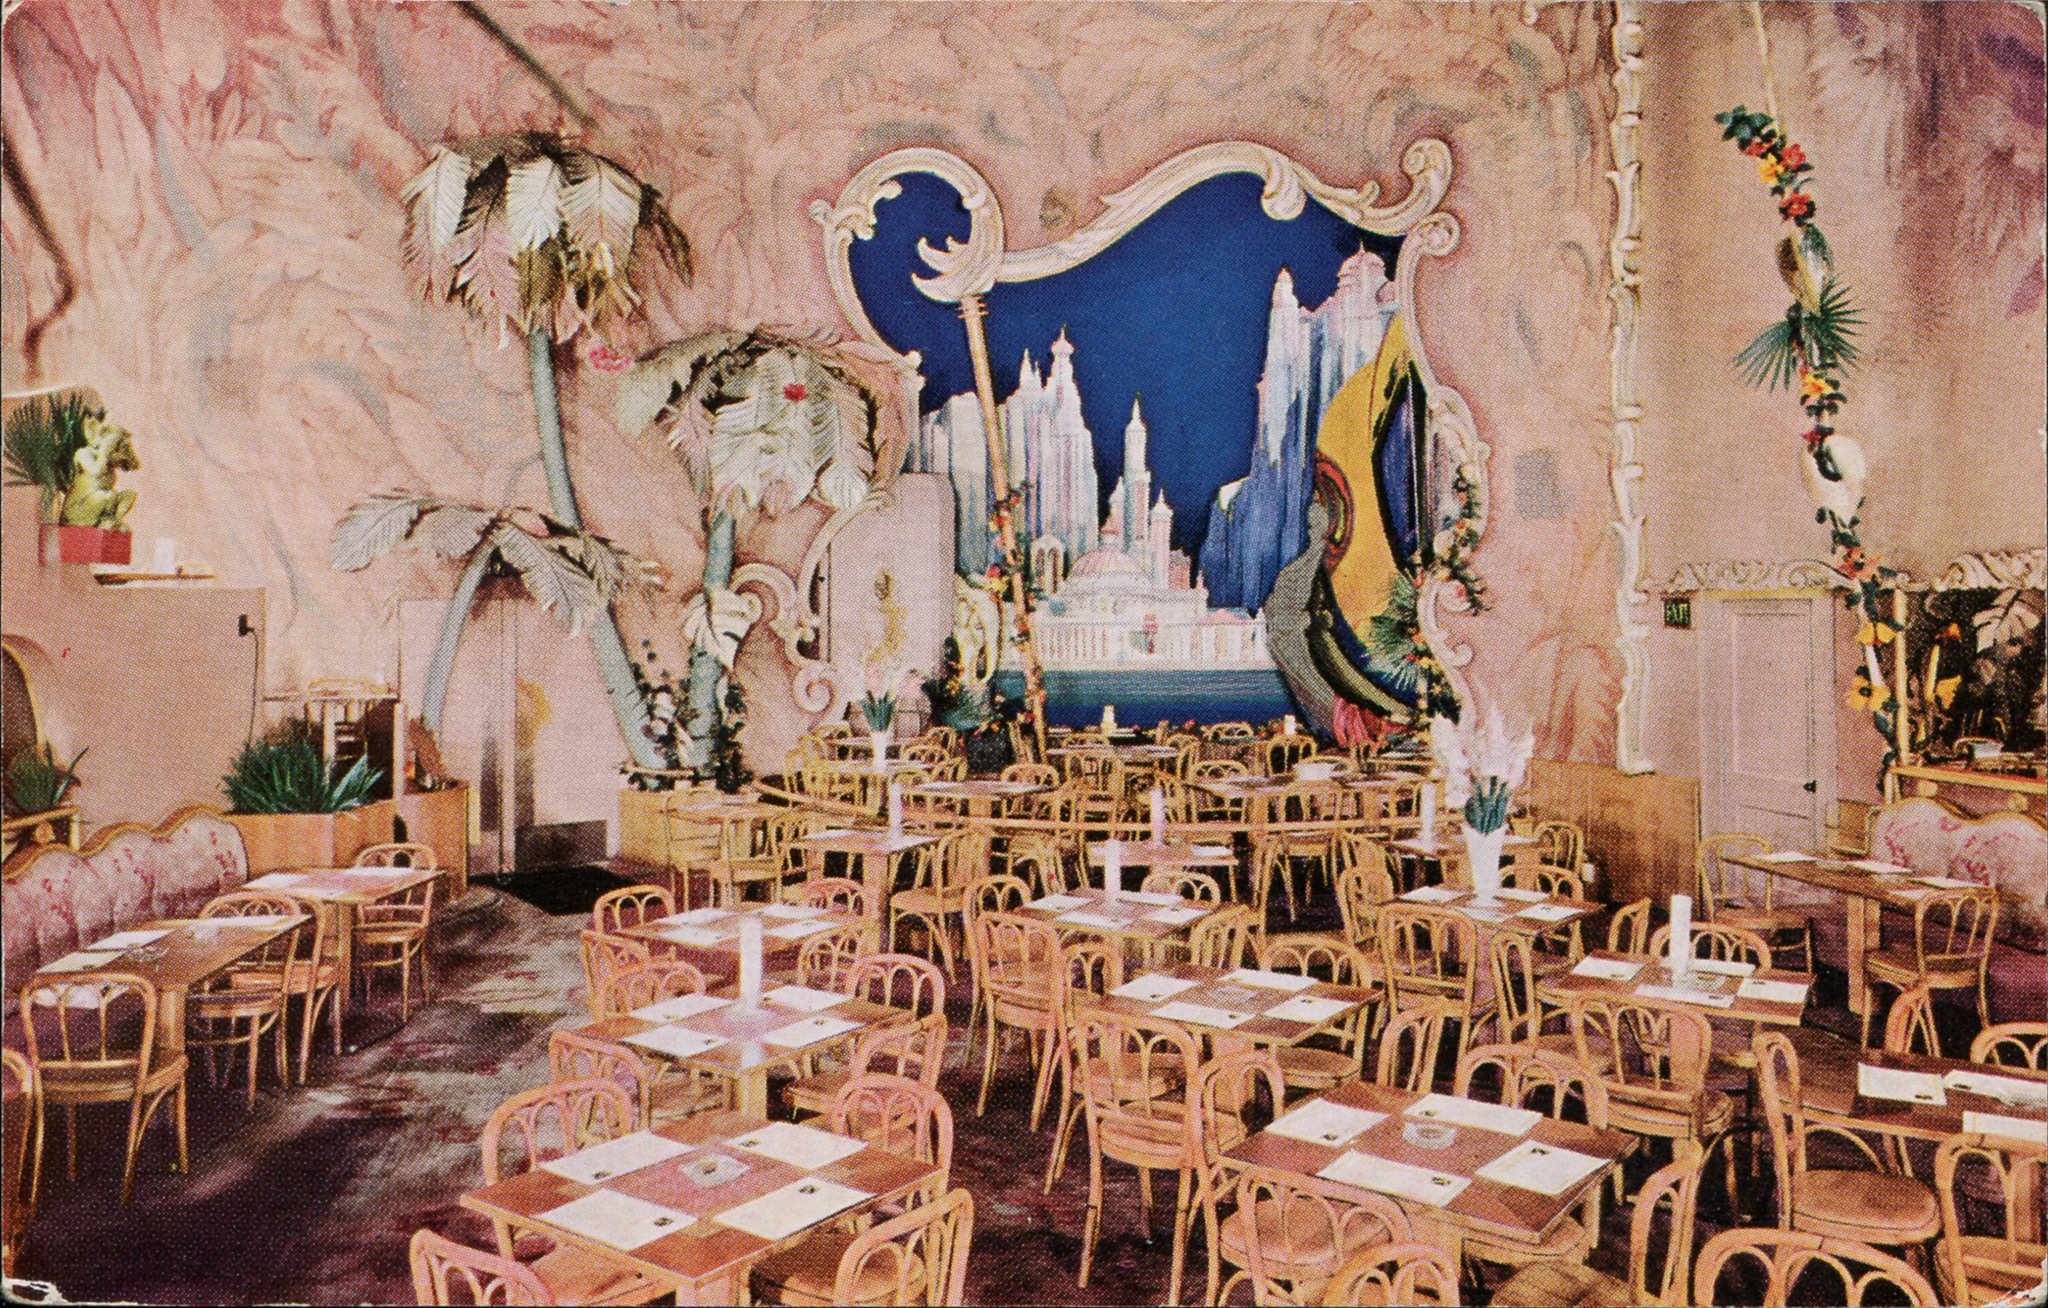 Beautiful and Unique Restaurants of the U.S. from the 1950s